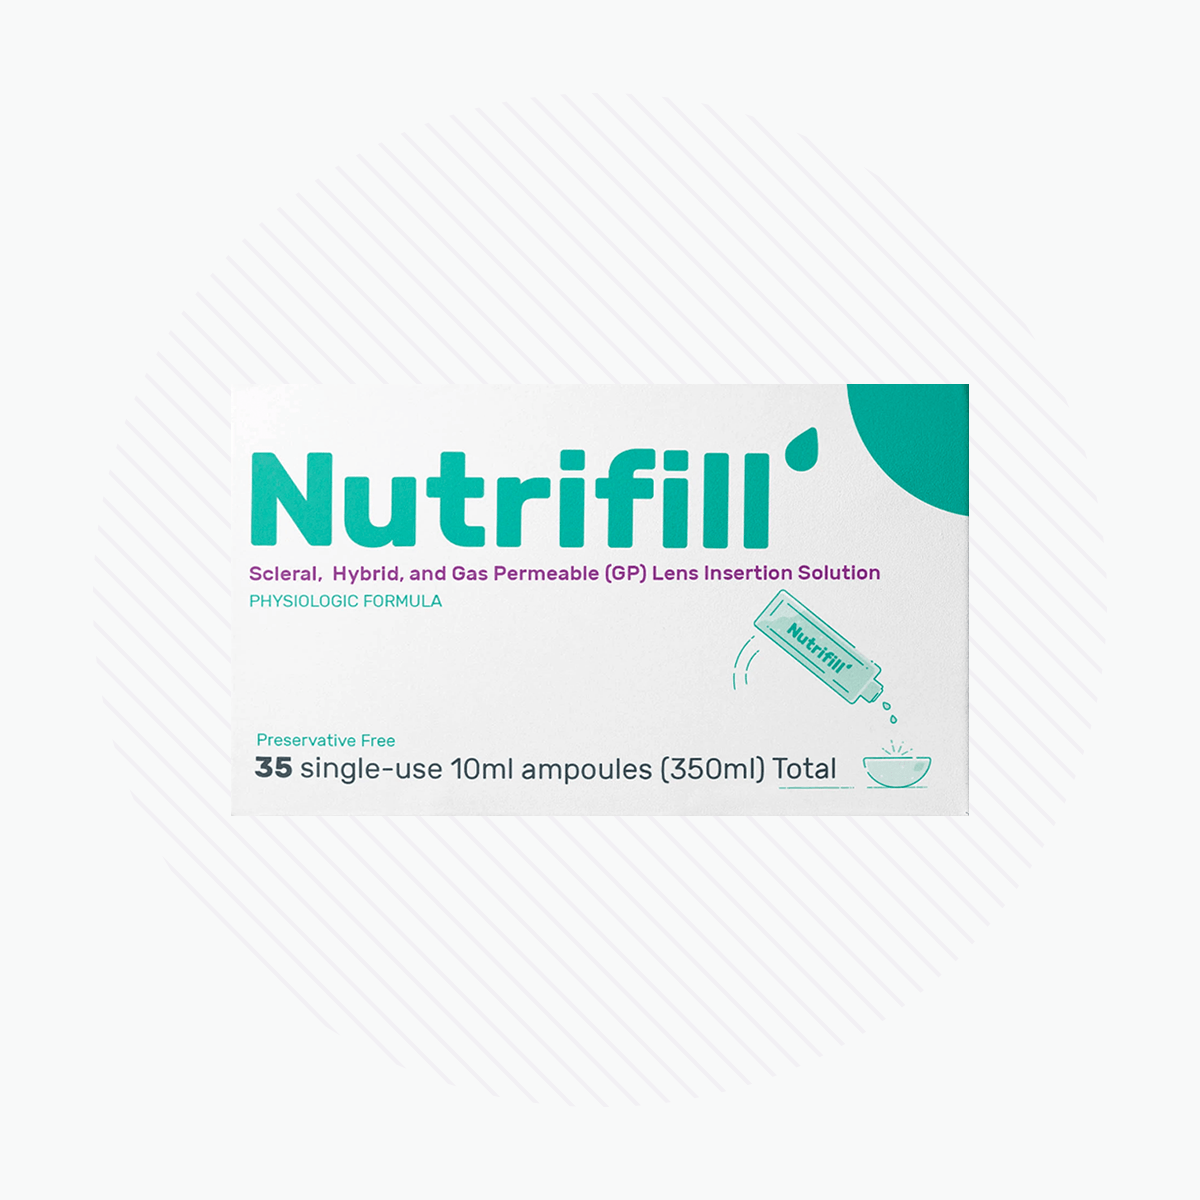 Nutrifill Preservative Free Scleral, Hybrid, and Gas Permeable (GP) Lens Insertion Solution - DryEye Rescue Store